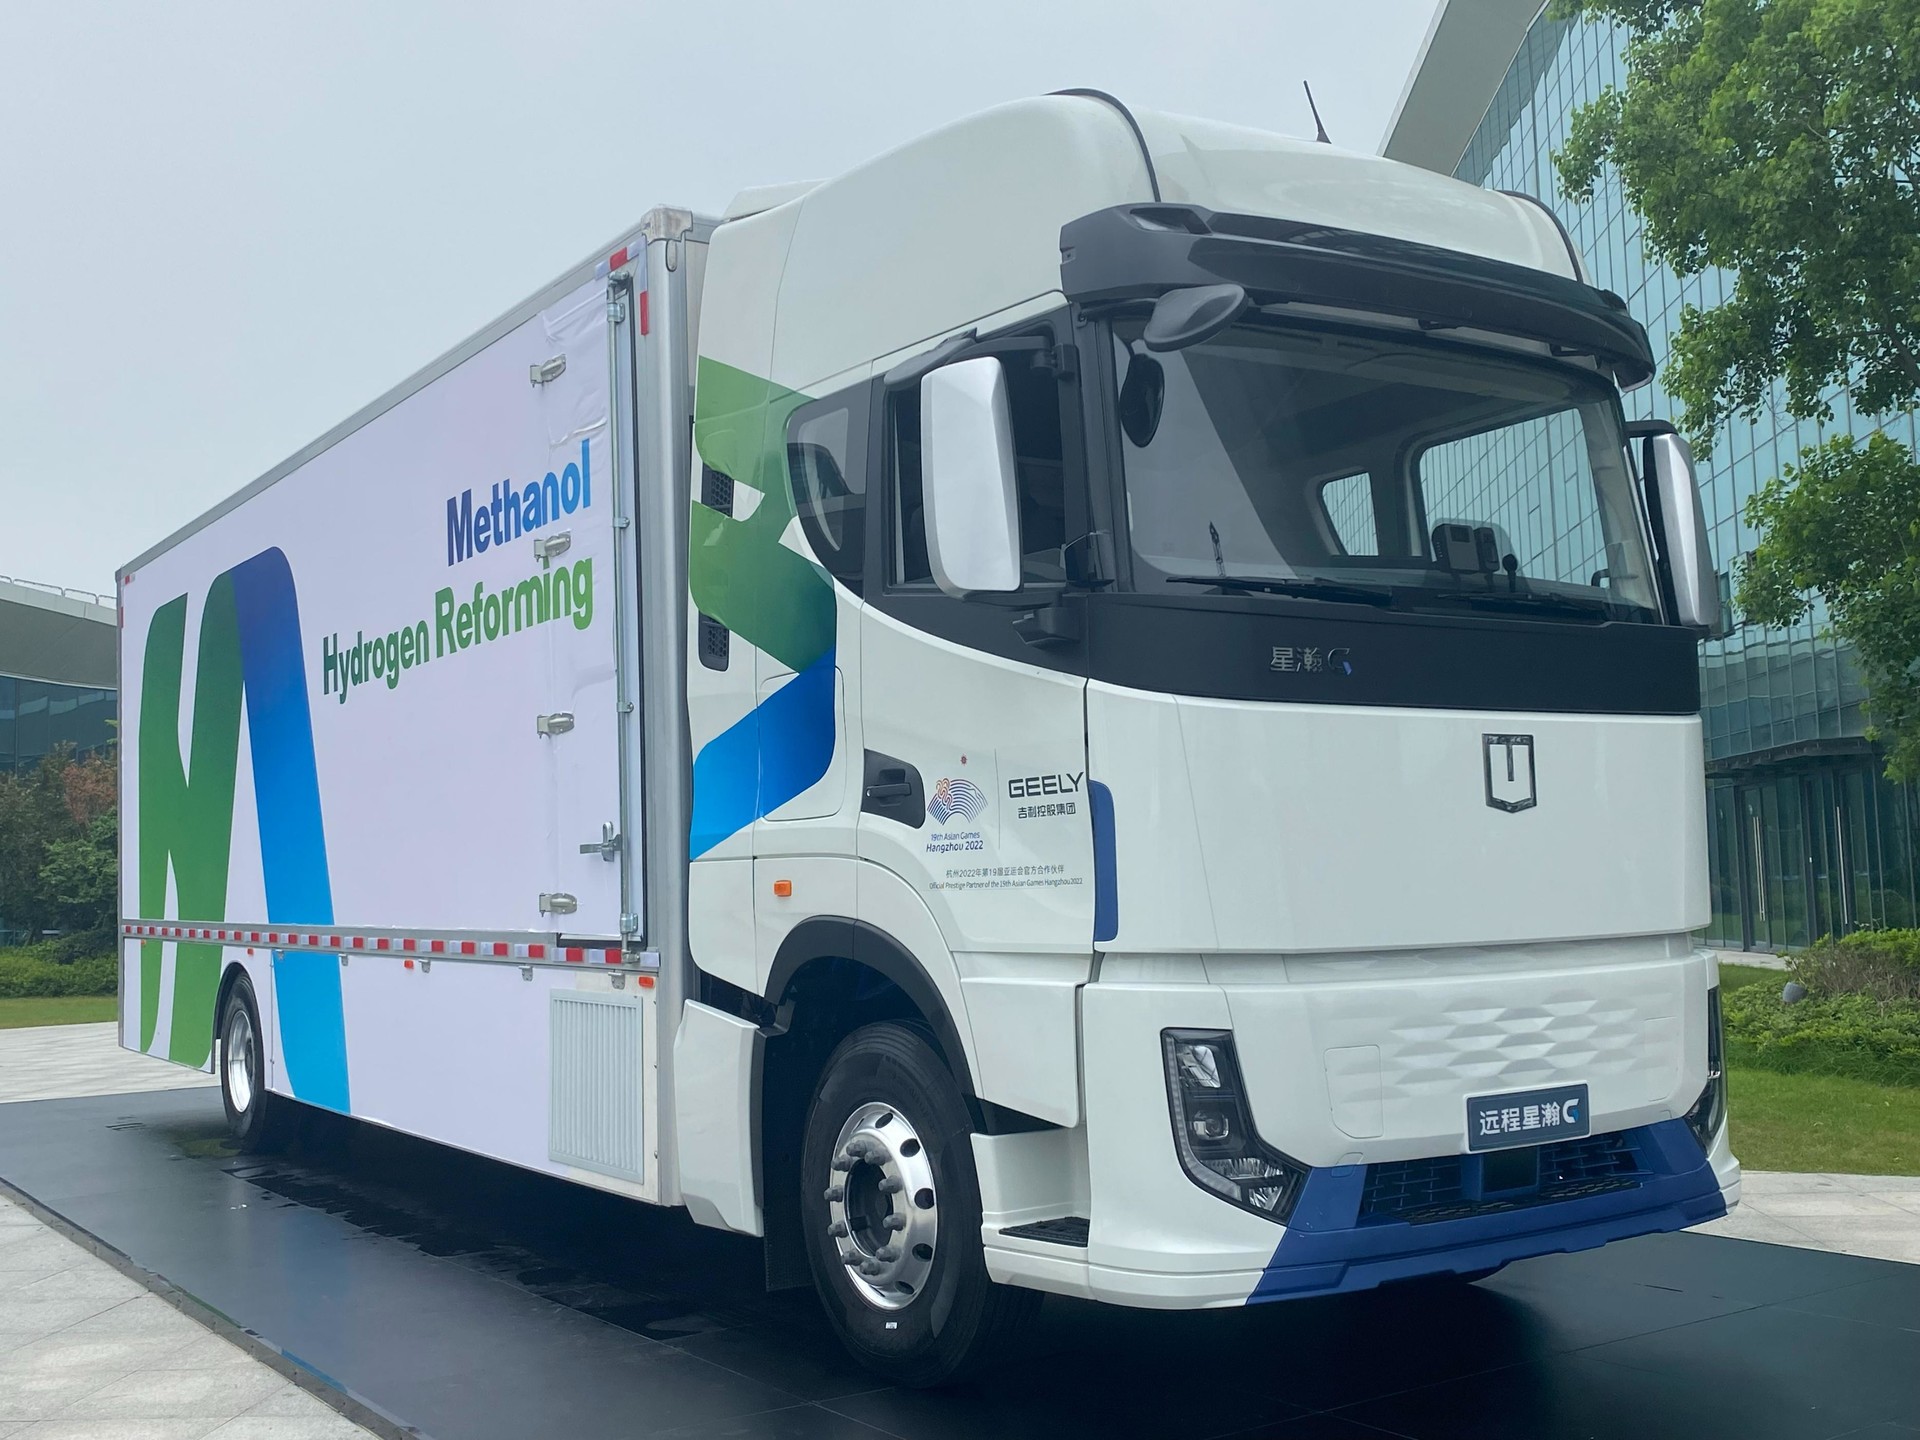 First methanol reforming to produce hydrogen cargo exposure! Remote to add another 